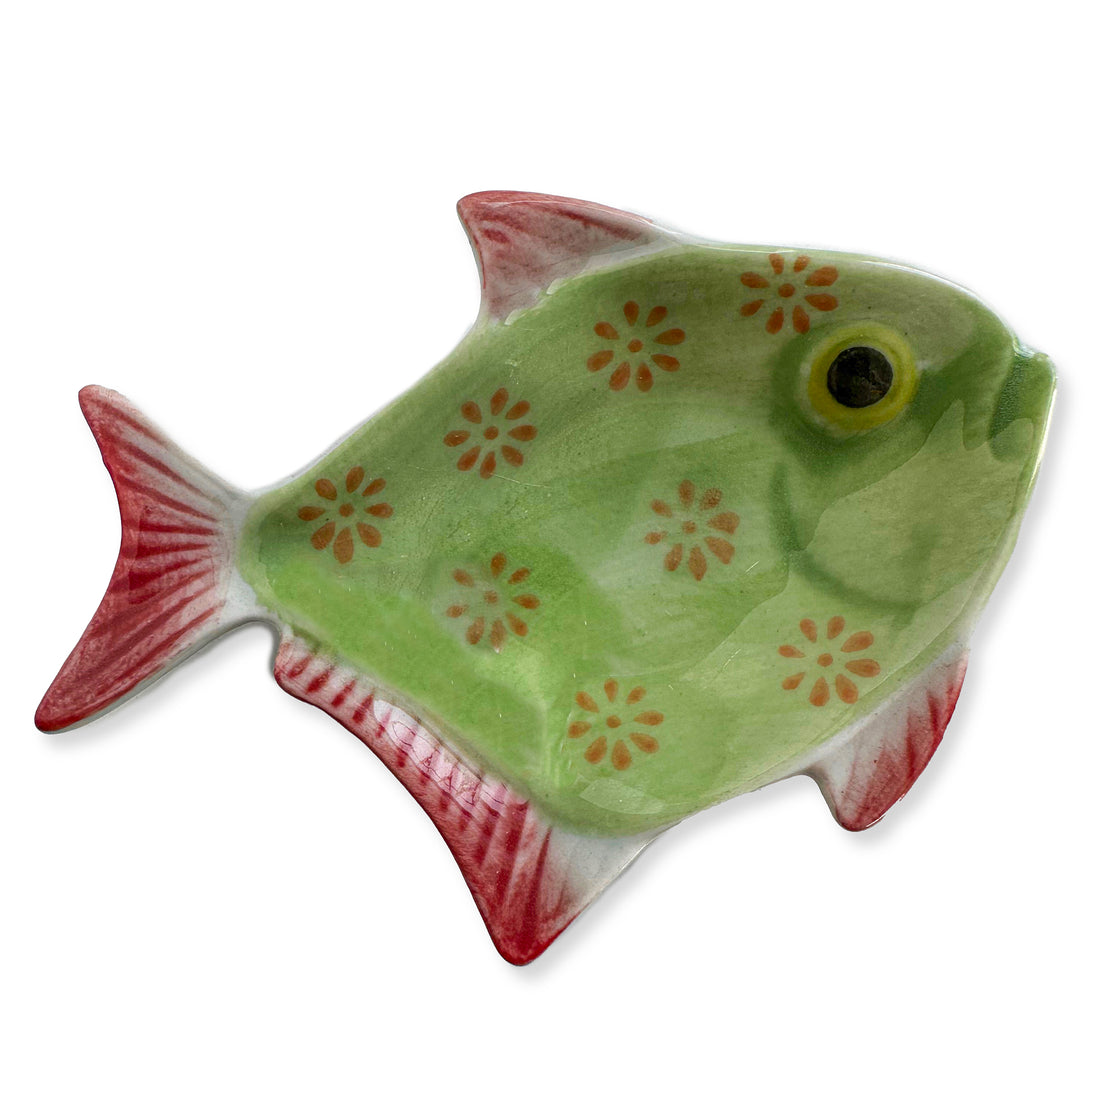  Mini Fish Plates in shades of red and green by rengora